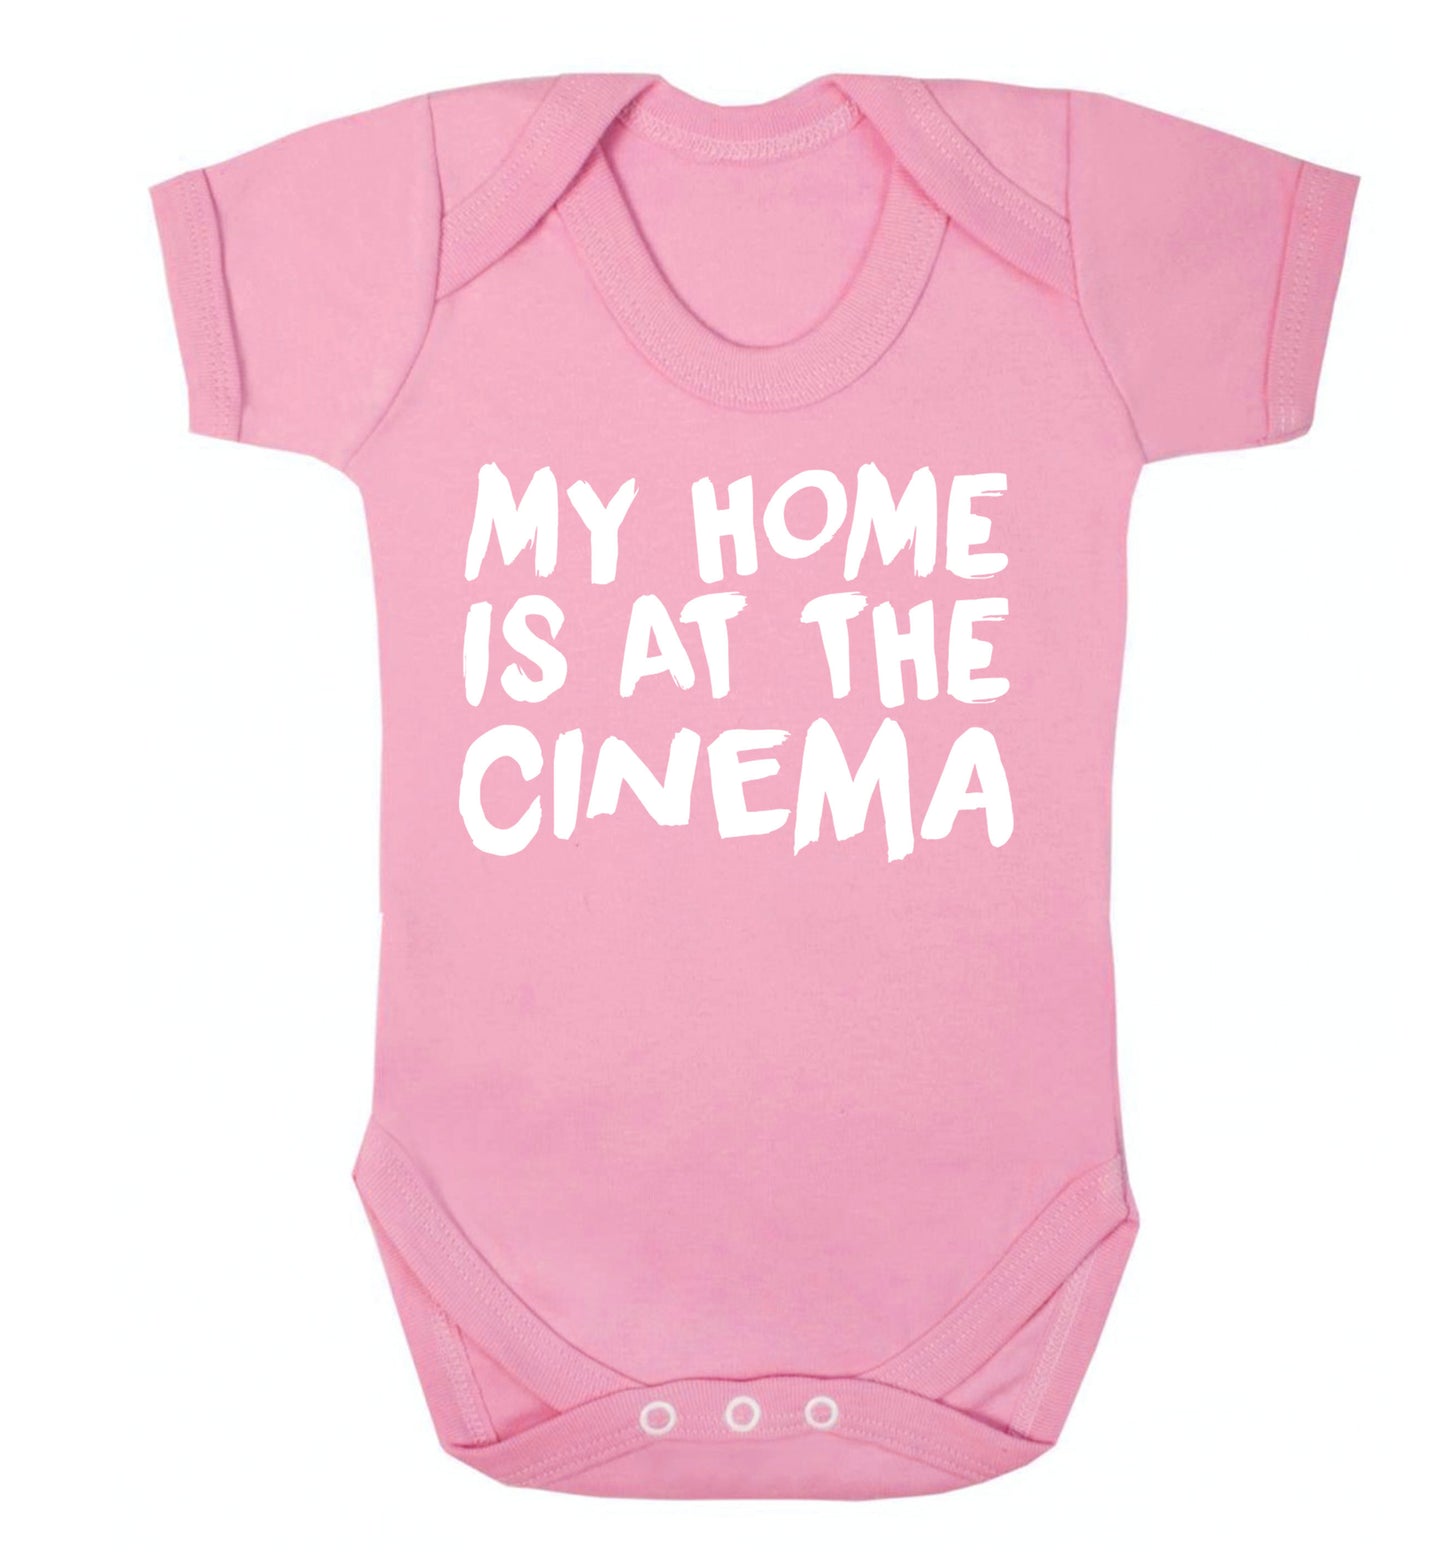 My home is at the cinema Baby Vest pale pink 18-24 months